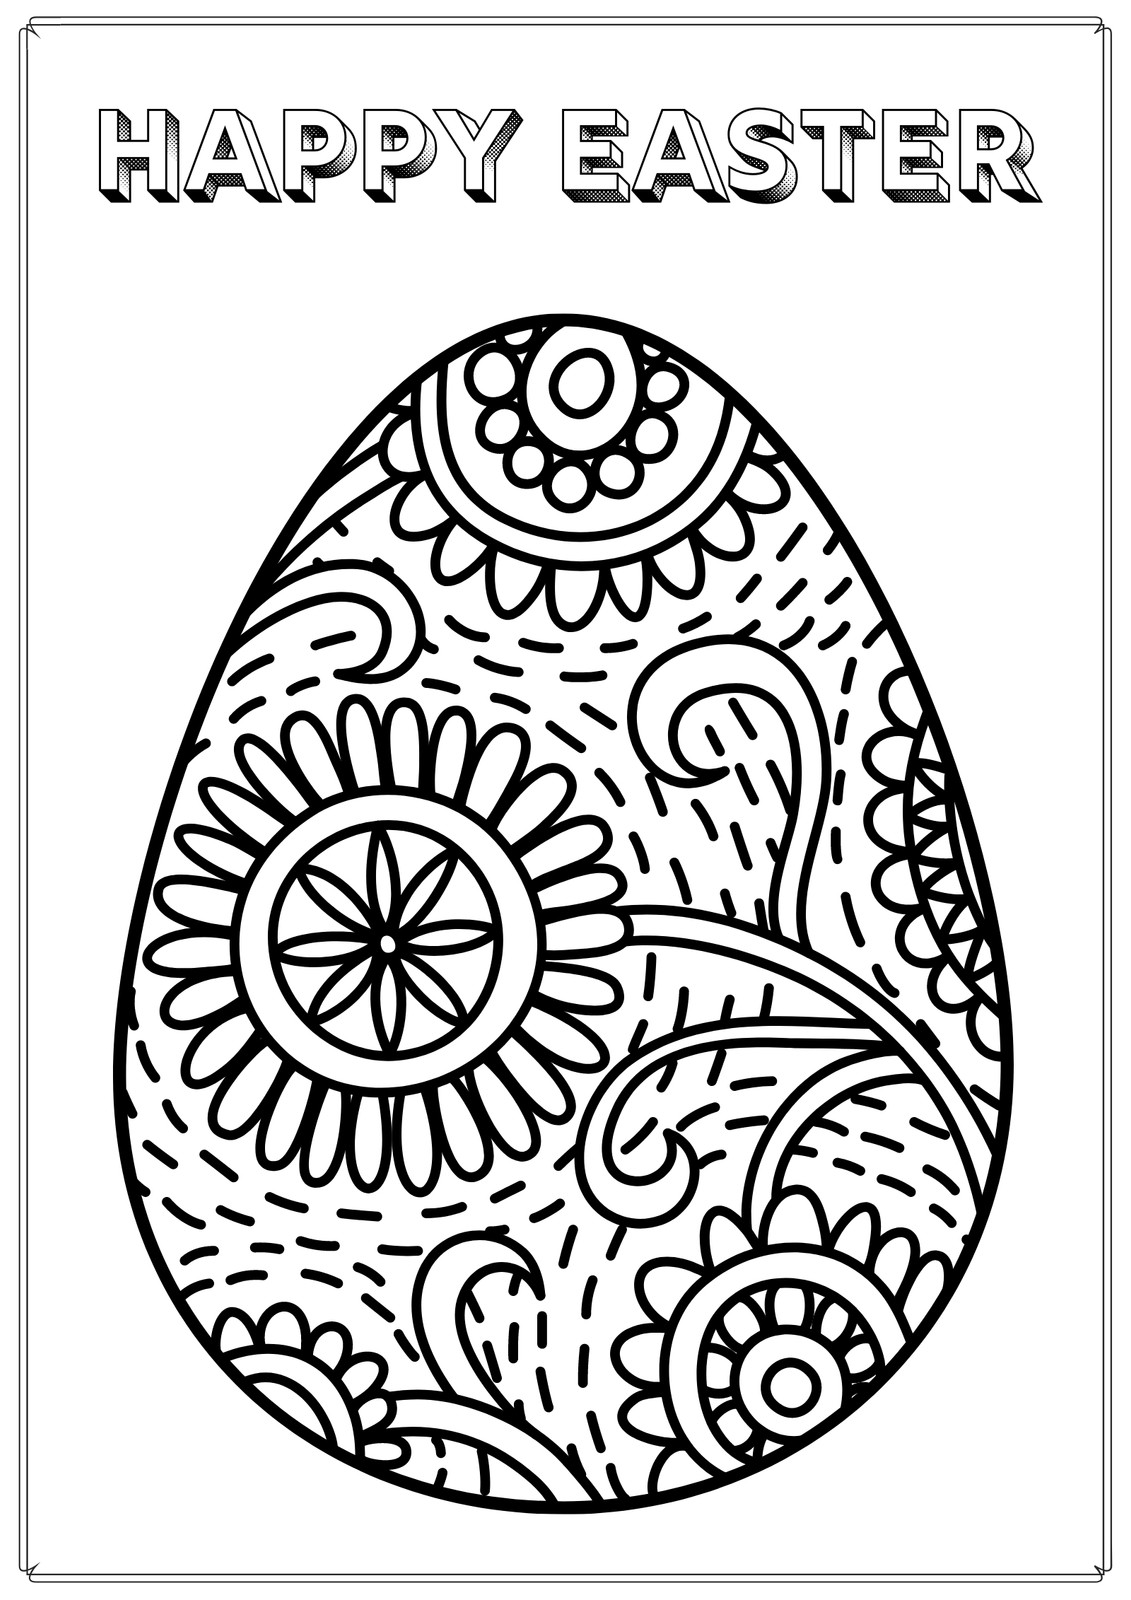 Page 8 - Free and customizable coloring templates